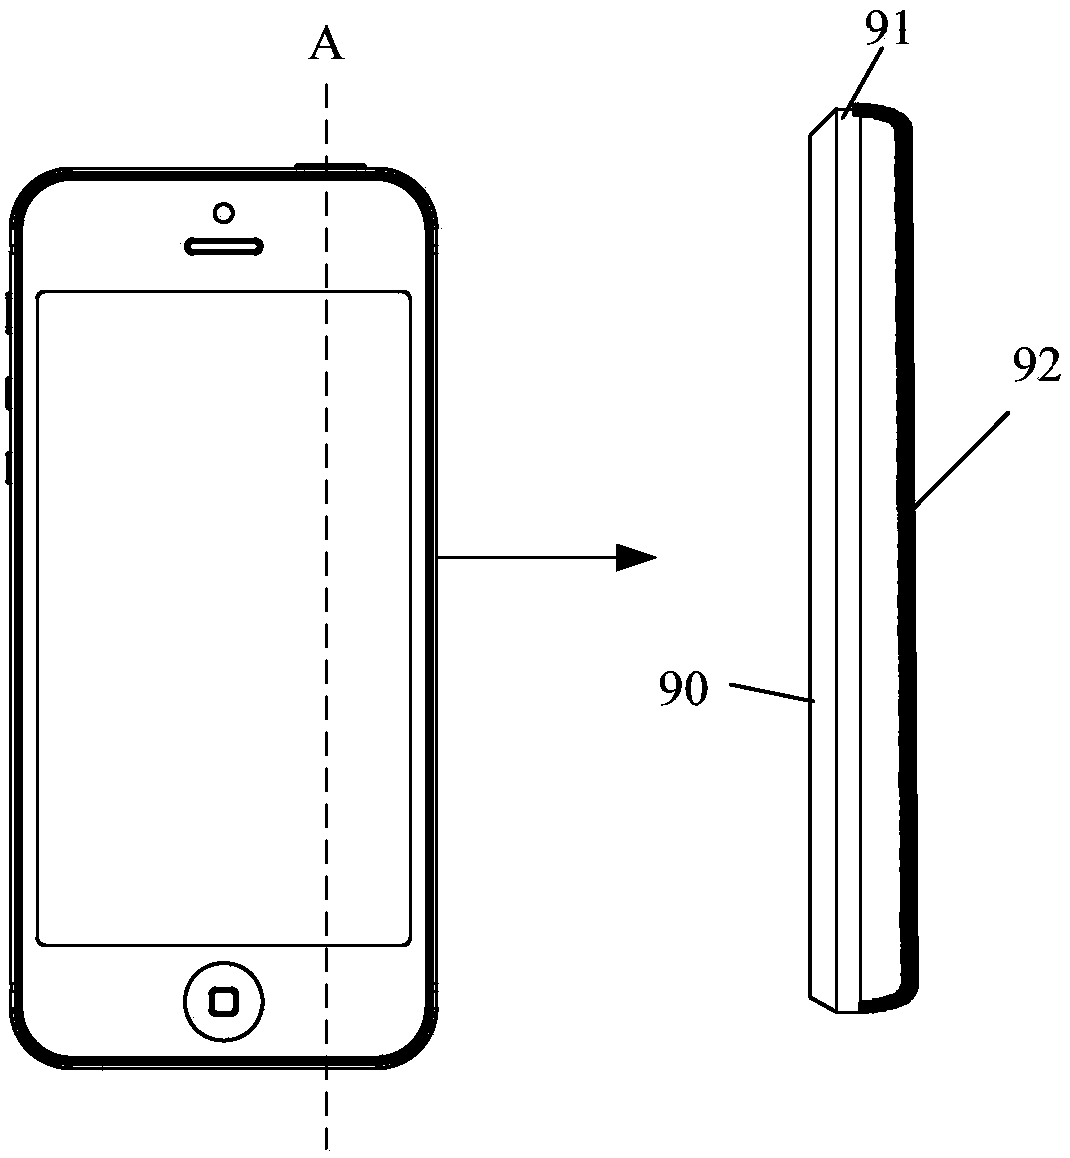 An electronic device and a method for making the curved glass